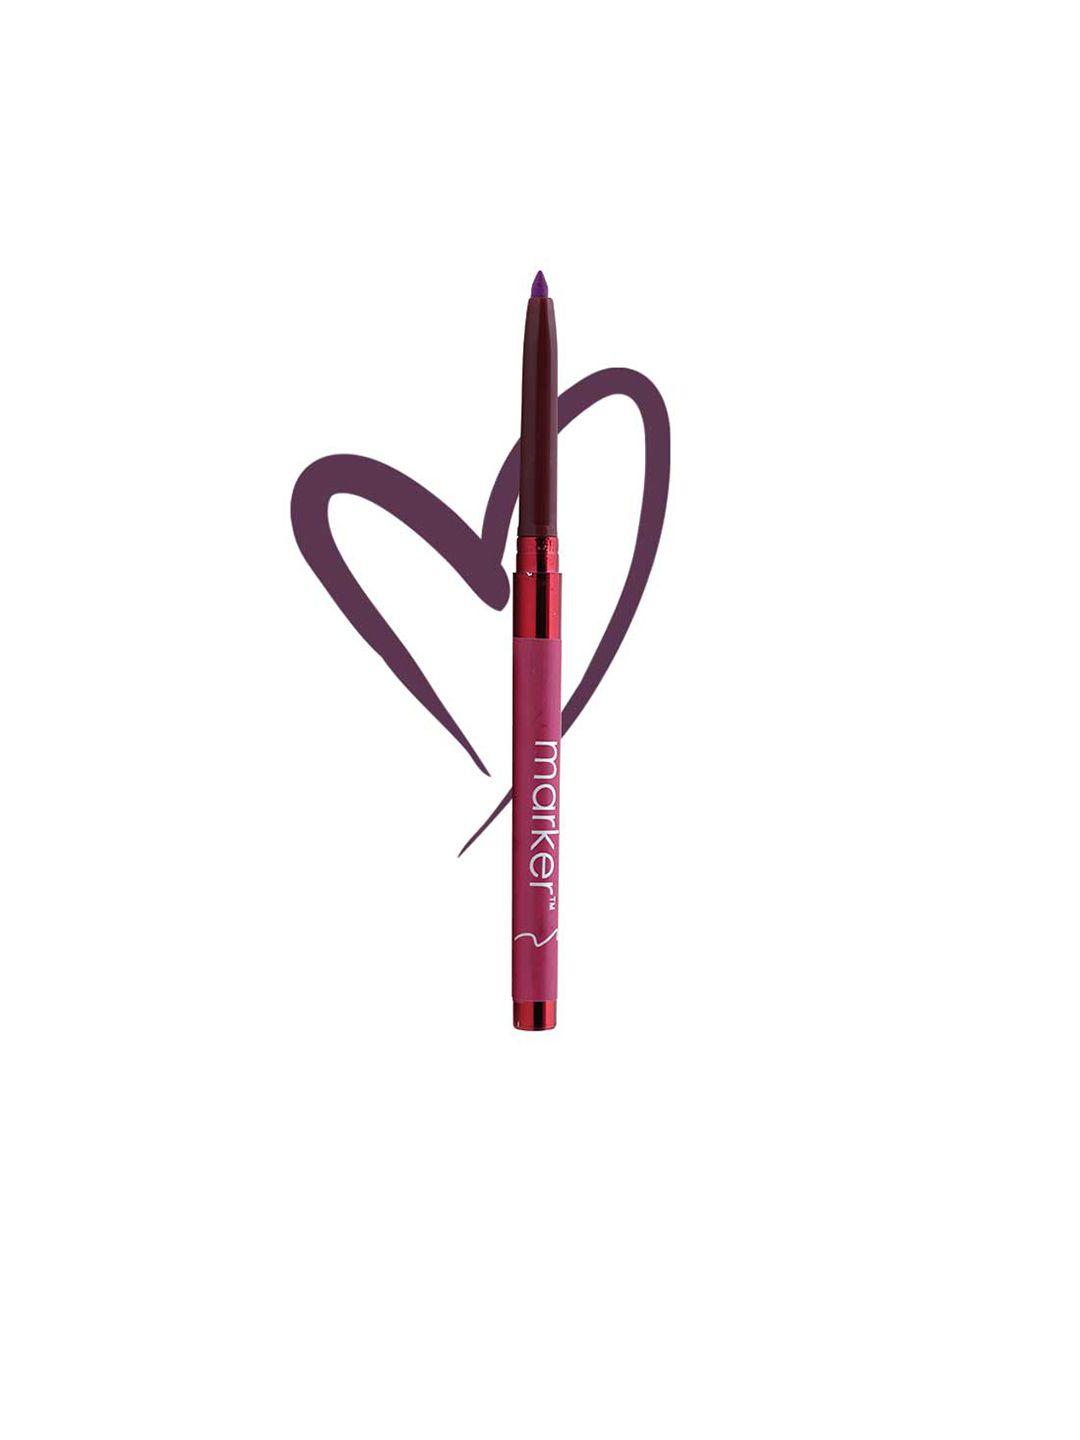 beautyrelay london outline the lips long-lasting lip liner with vitamin e 0.27g - classic mauve